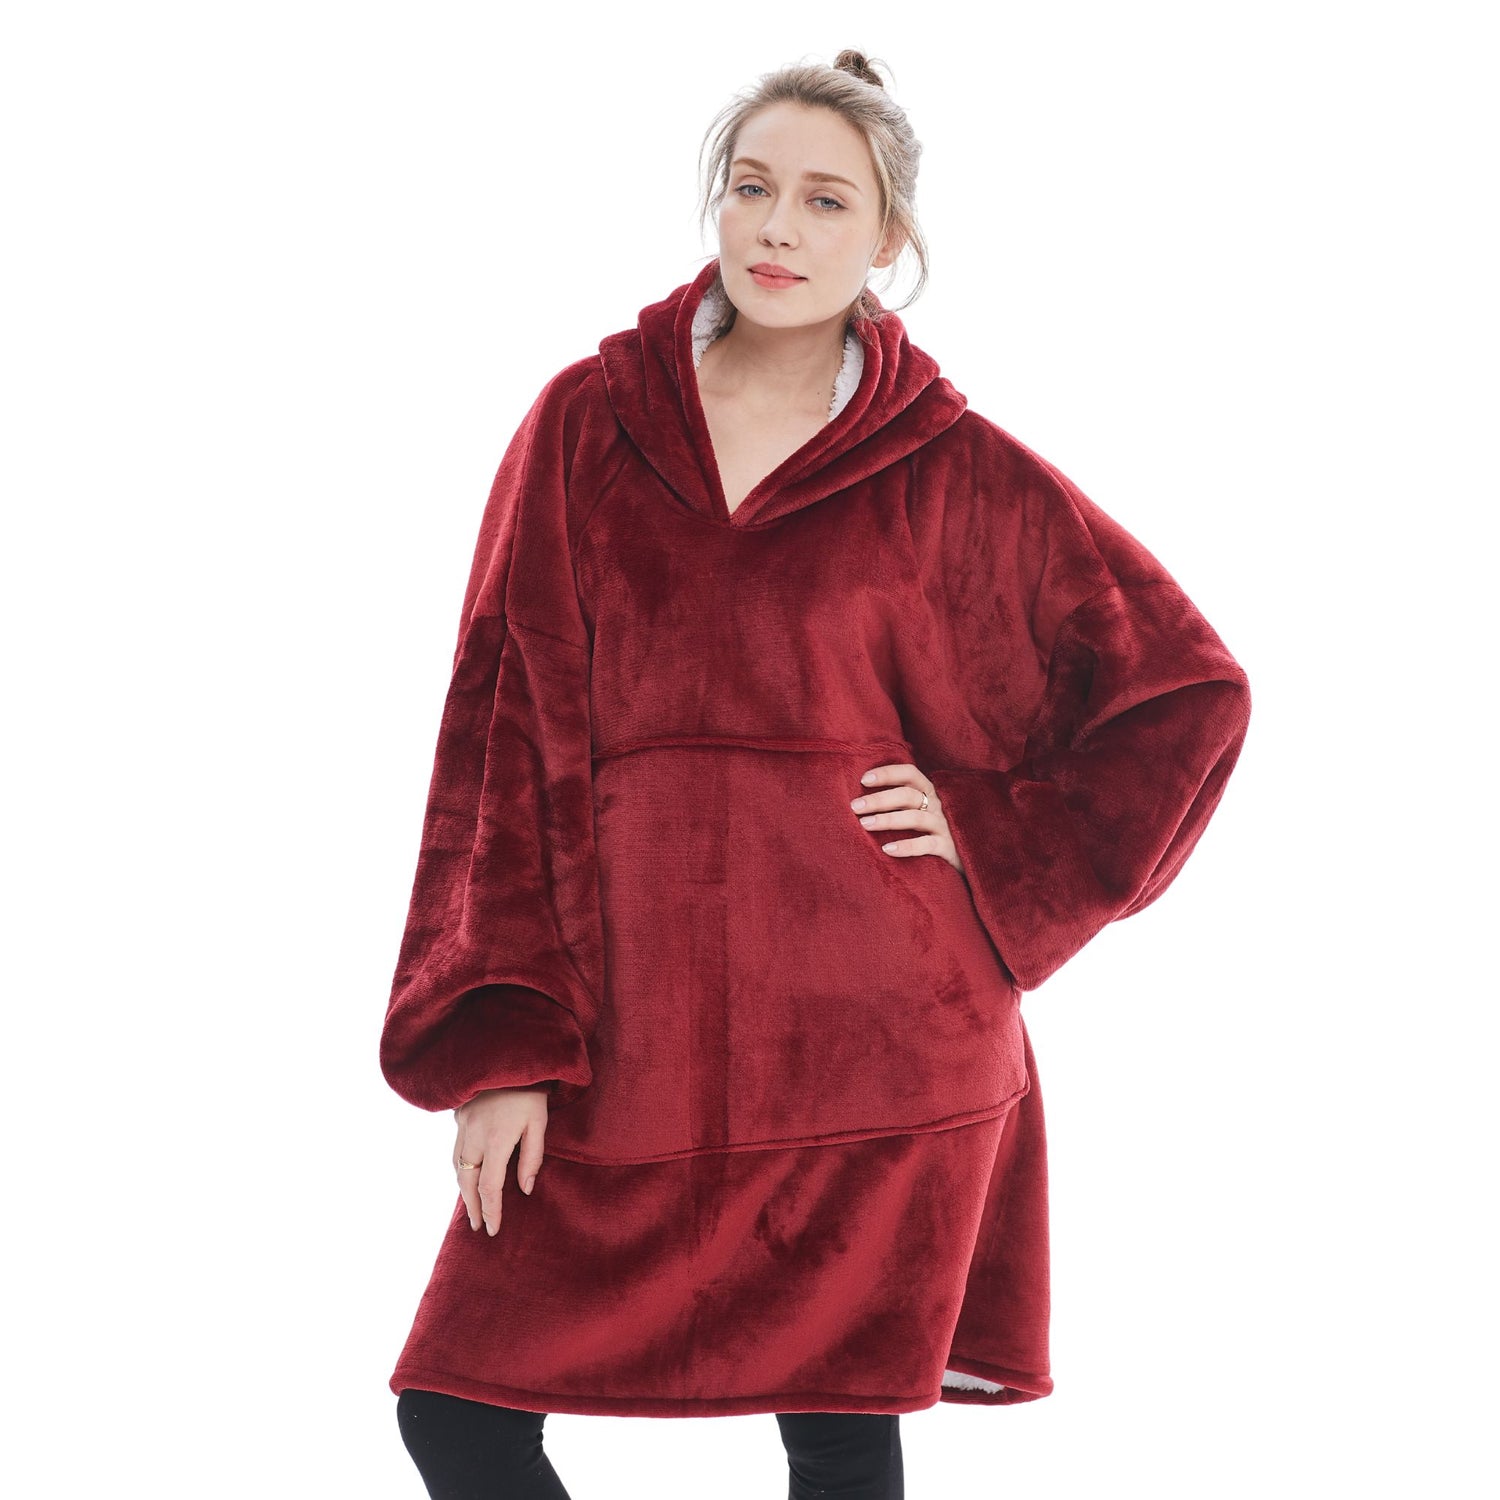 The Oversized Hoodie® woman best quality in the world red burgundy 